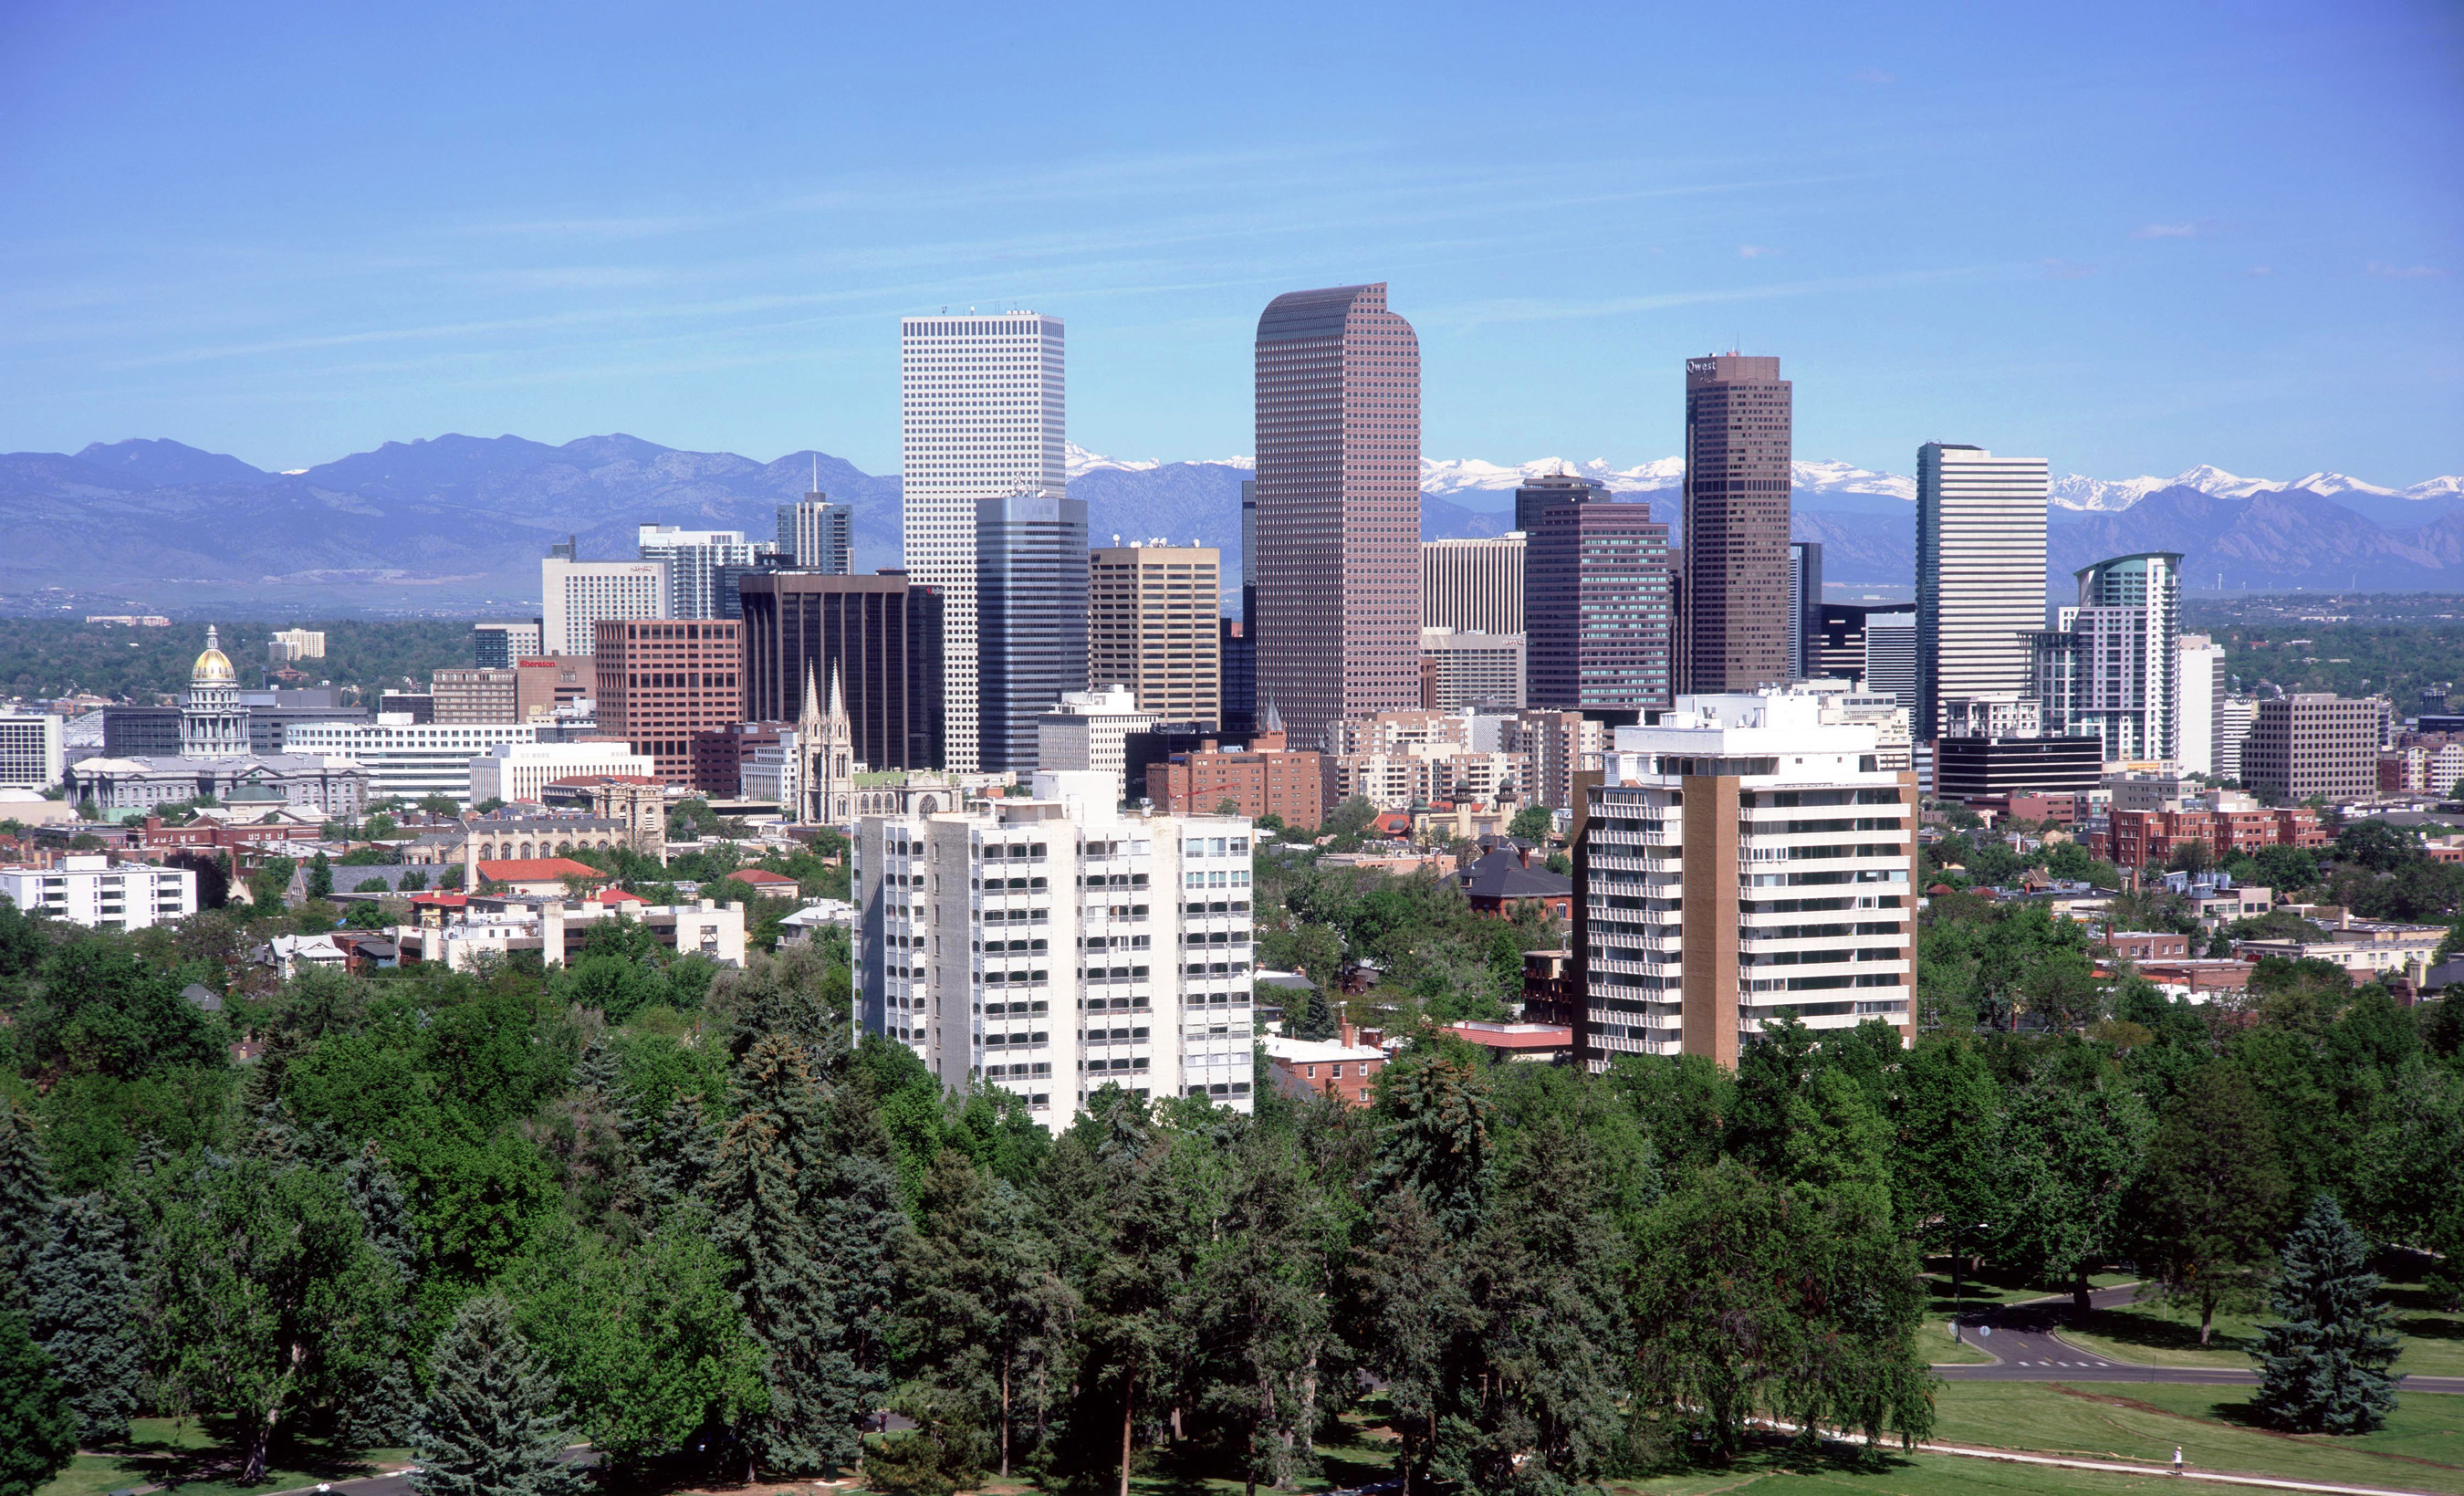 Denver public relations firm Word PR + Marketing works with Colorado clients in architecture, urban design and landscape architecture, as well as hospitality in Denver, Boulder and Vail.